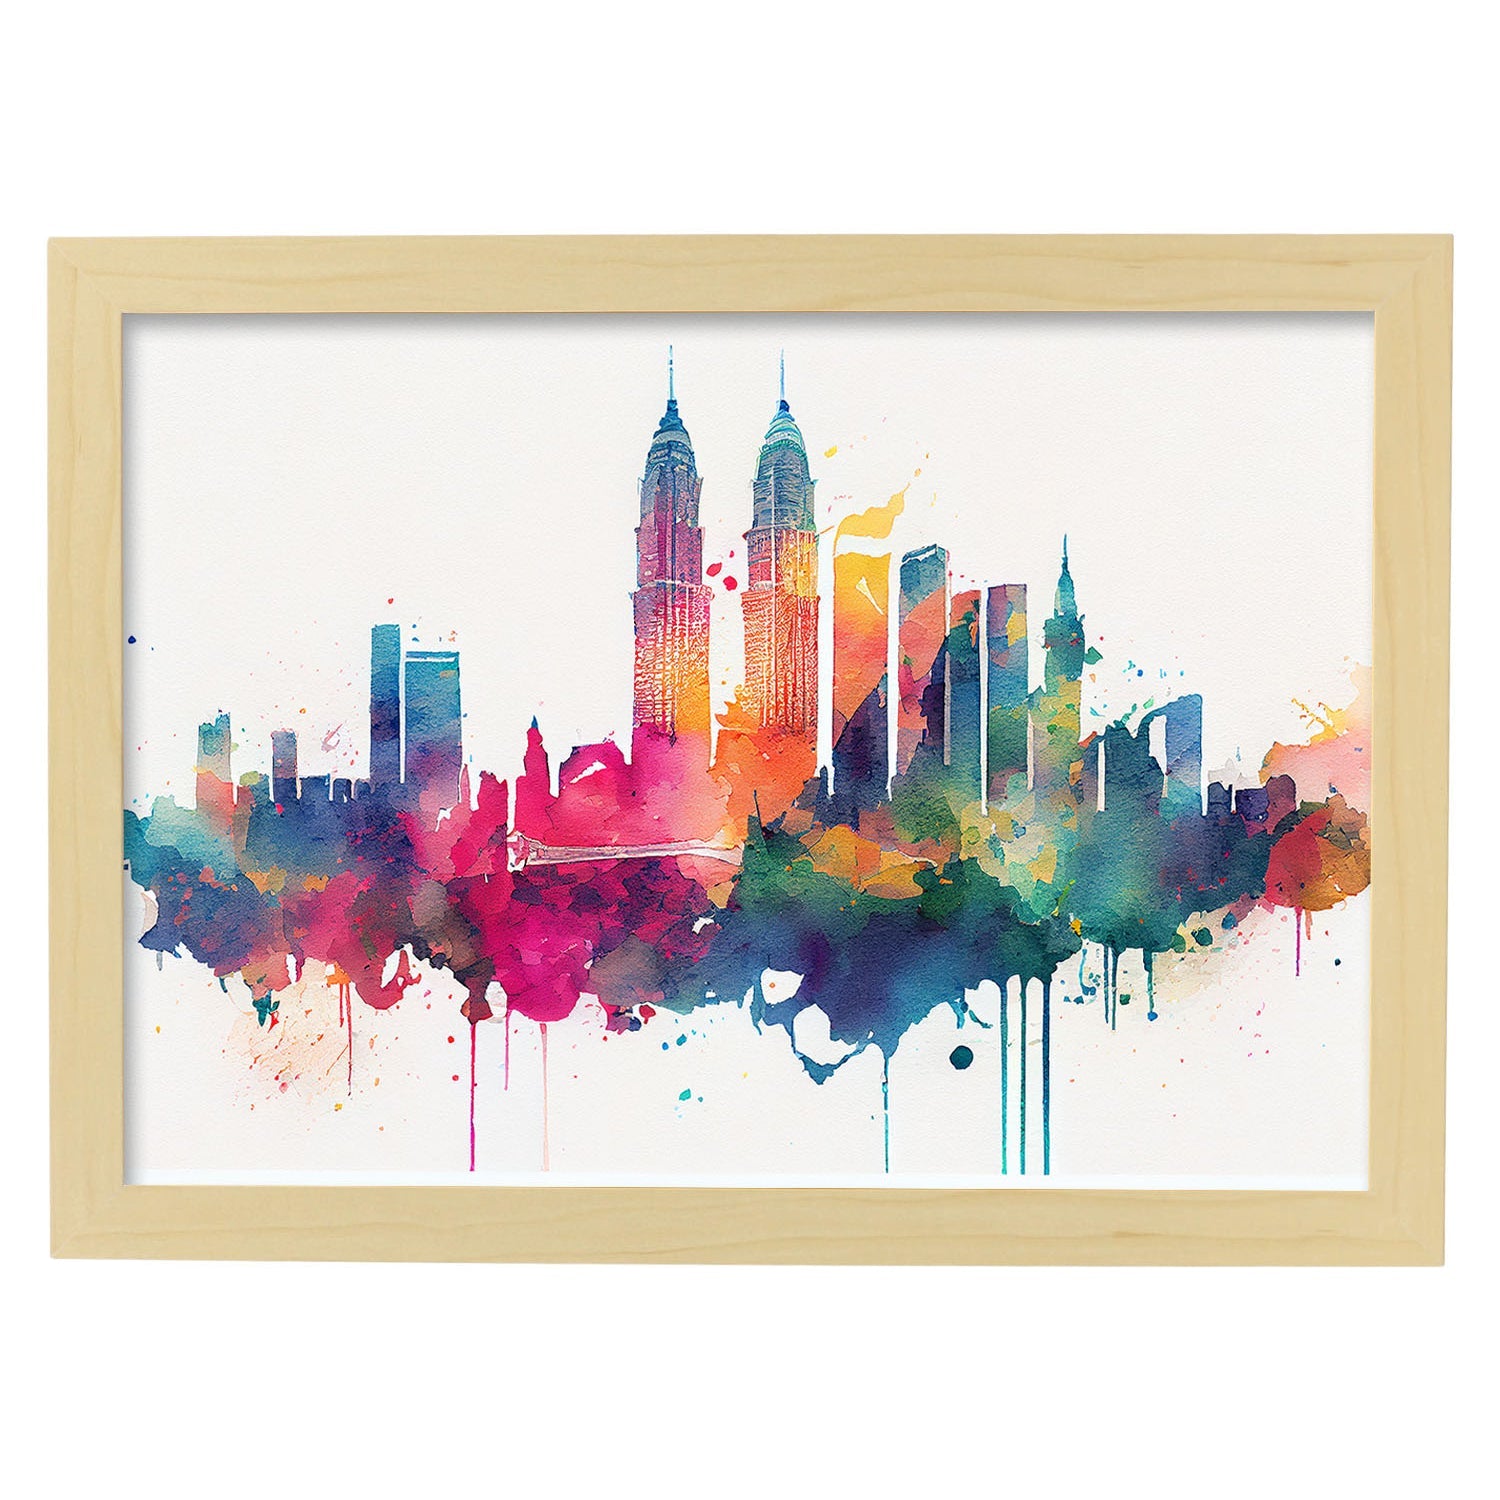 Nacnic watercolor of a skyline of the city of Kuala Lumpur_1. Aesthetic Wall Art Prints for Bedroom or Living Room Design.-Artwork-Nacnic-A4-Marco Madera Clara-Nacnic Estudio SL